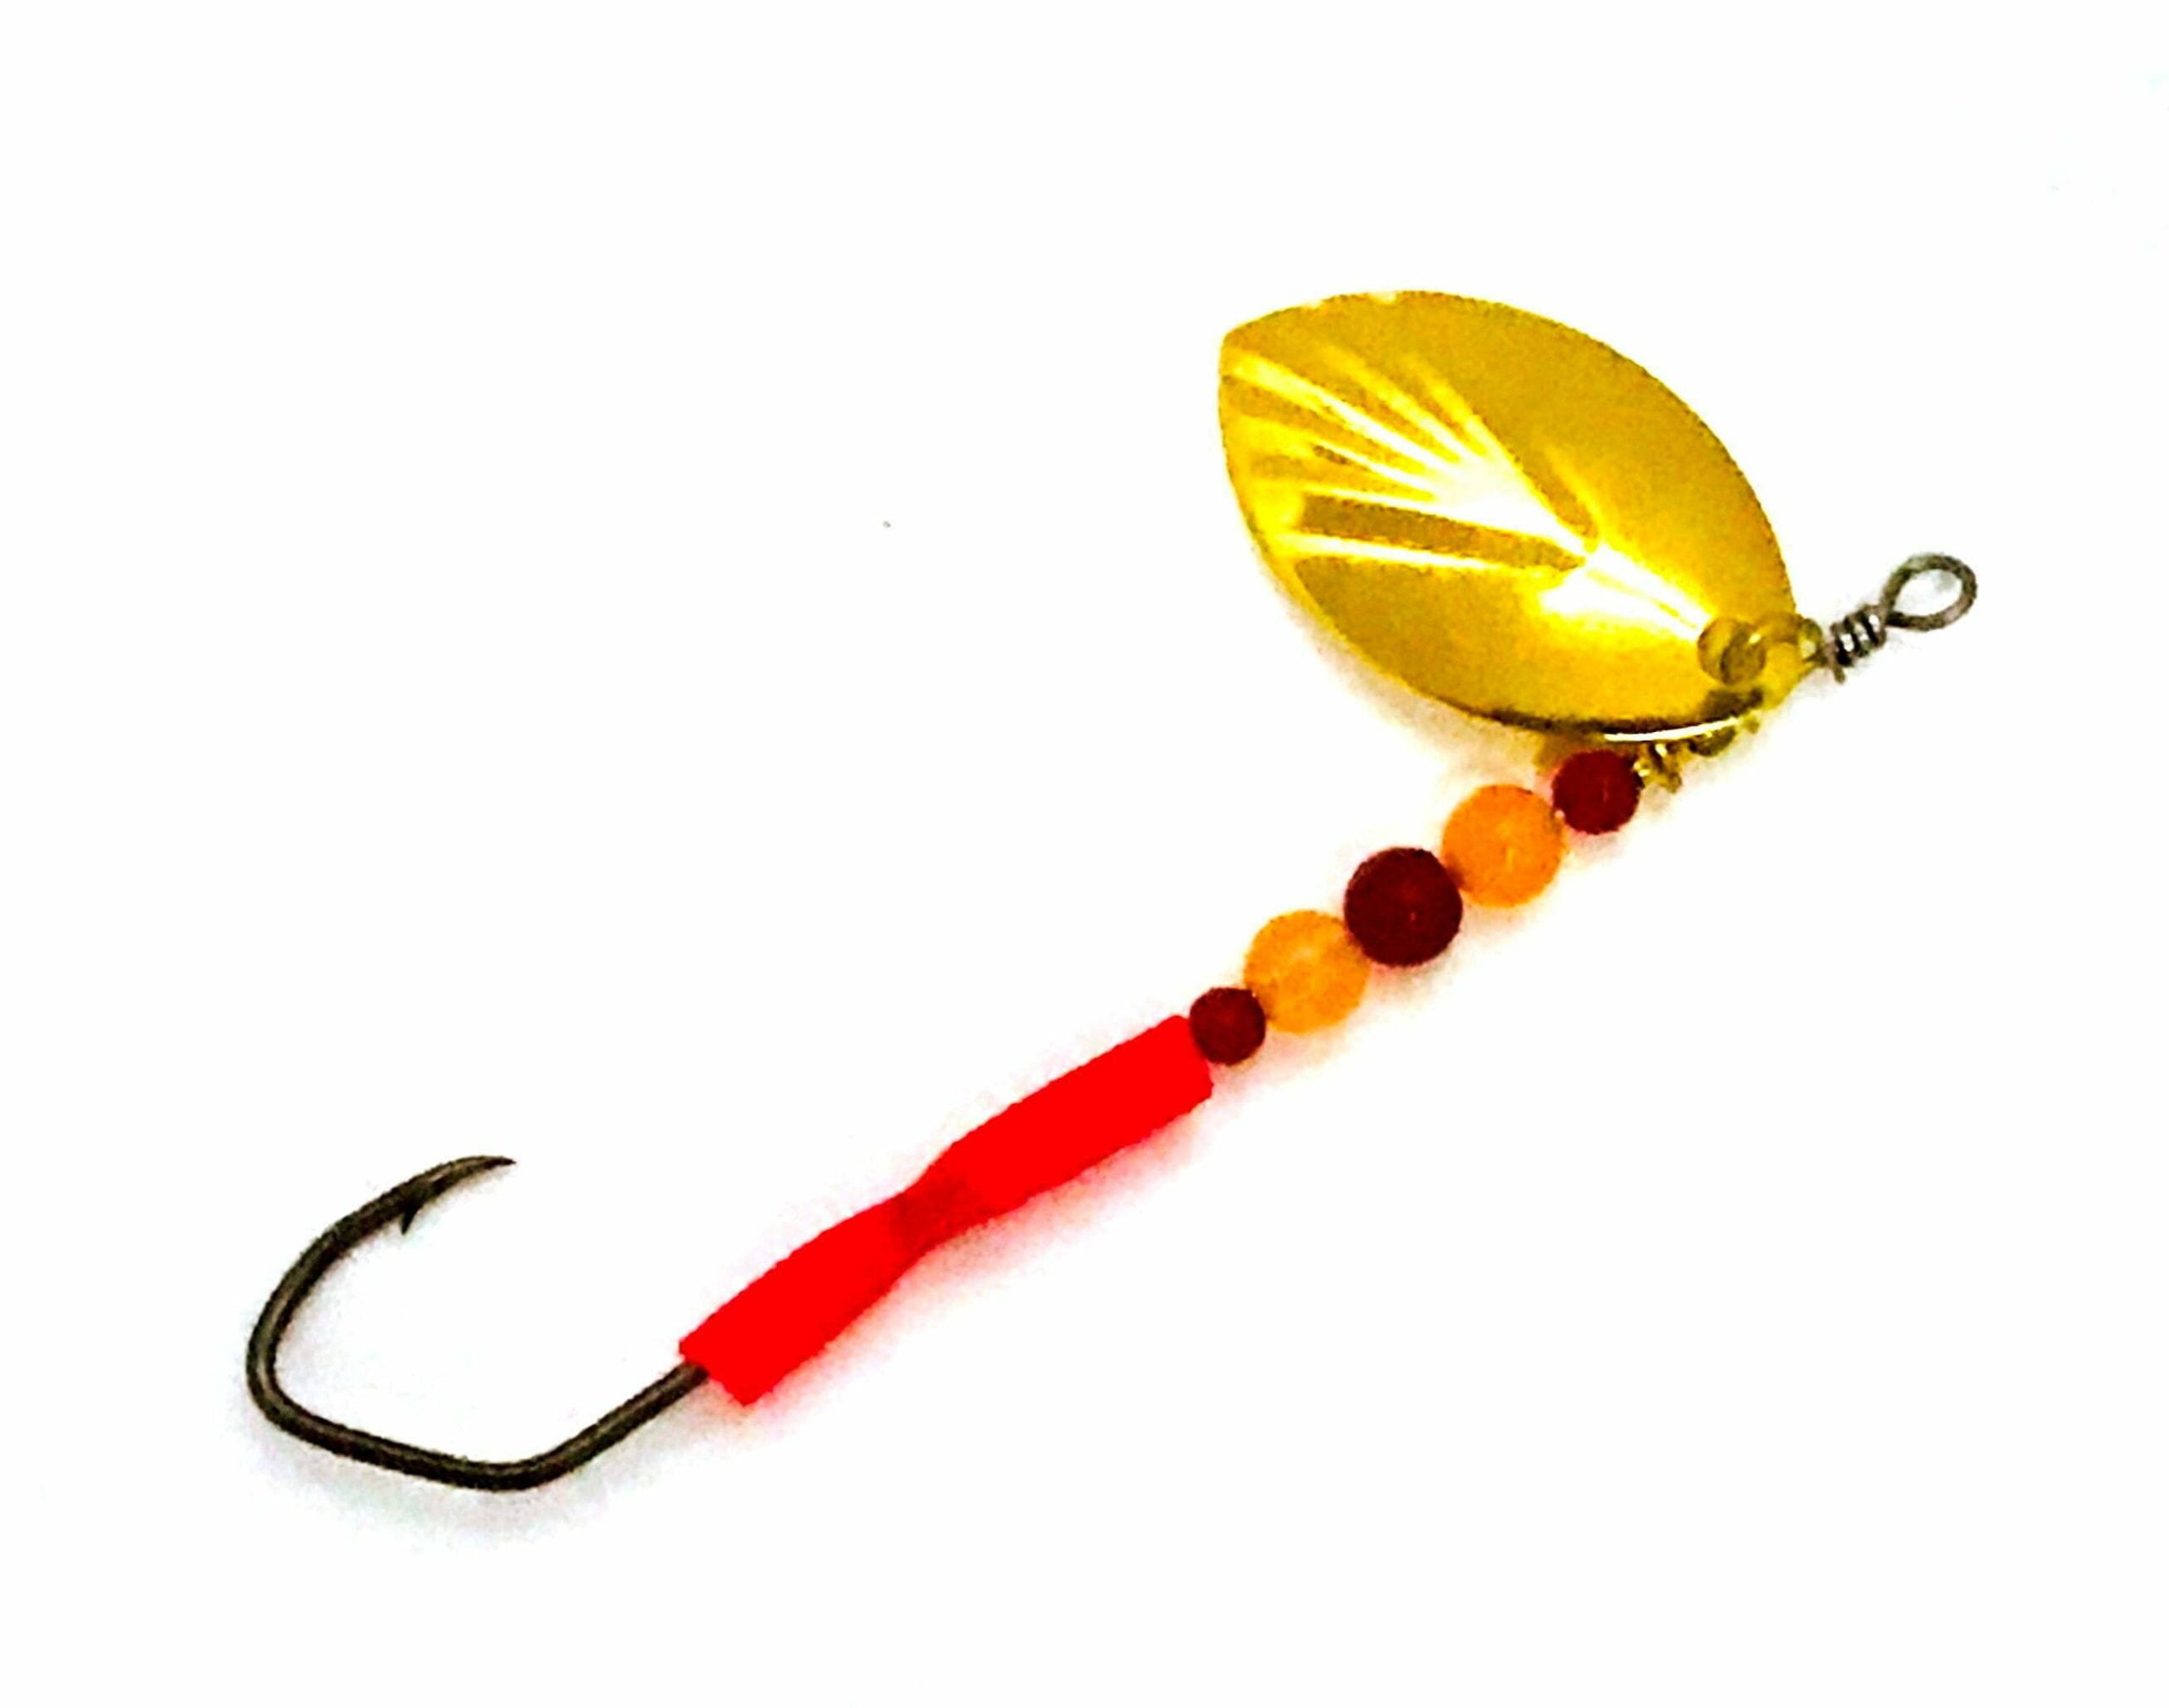 https://stonecoldbeads.com/wp-content/uploads/2019/04/Dirty-Troll-4-Cascade-Red-Crawfish-Trolling-Spinner-with-Sickle-Hook-scaled.jpeg